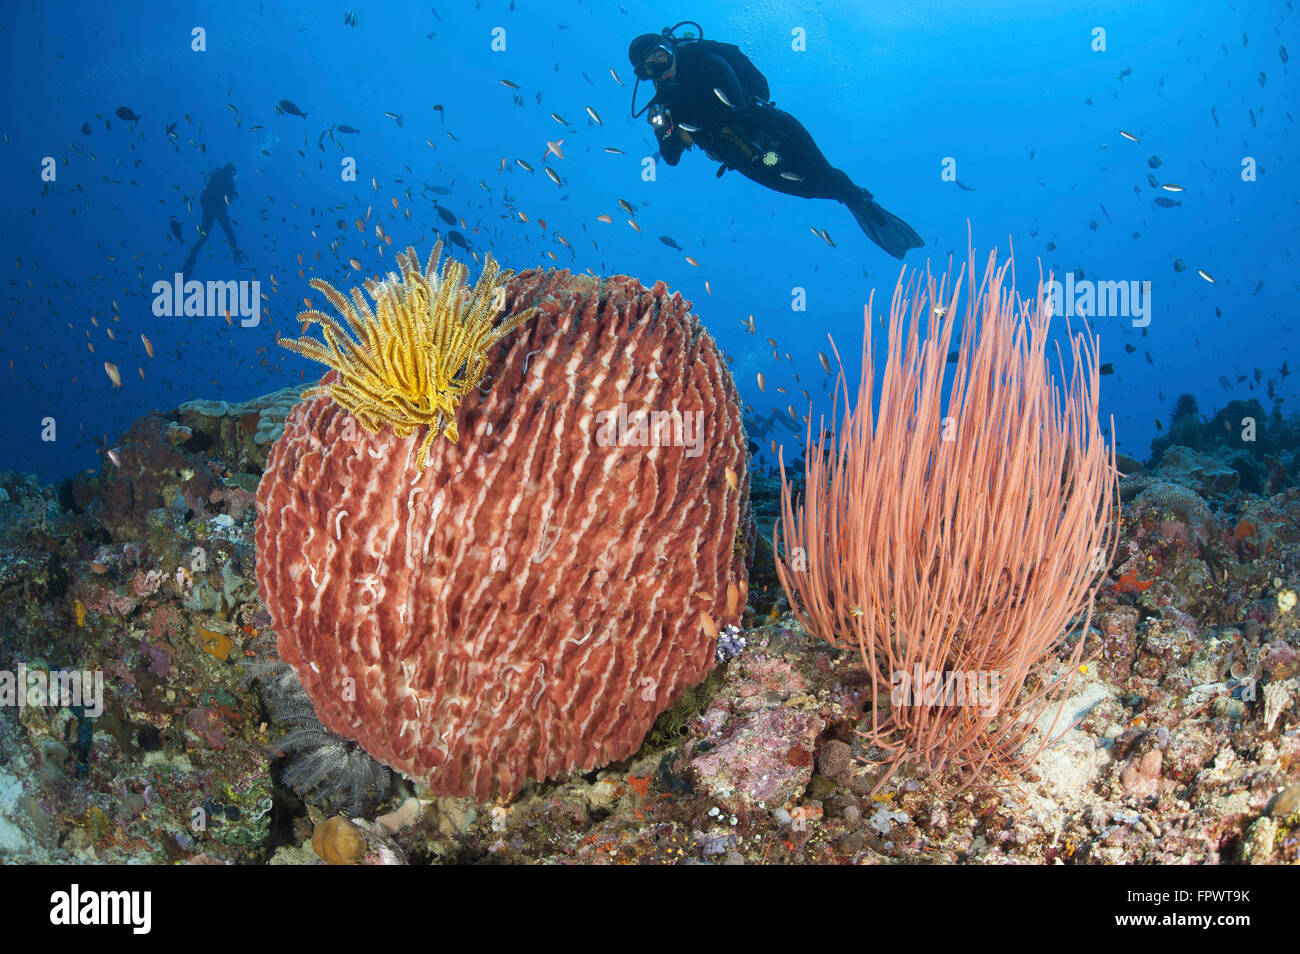 Diver looks on at sponges, soft corals and crinoids in a colorful Komodo seascape,  Komodo National Park, Indonesia. Stock Photo